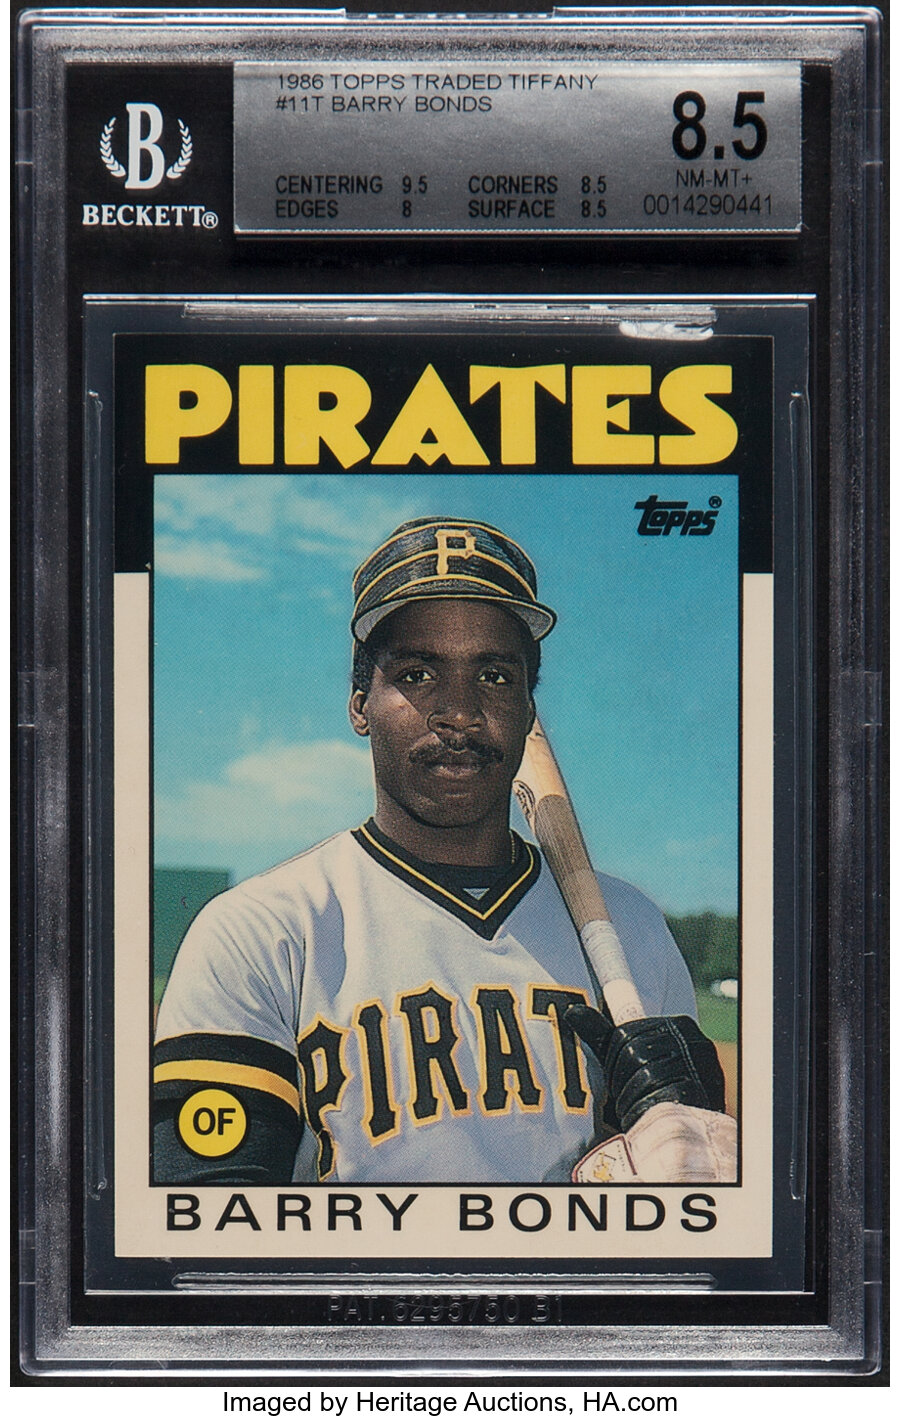 1986 Topps Traded Tiffany Barry Bonds #11T BGS NM-MT+ 8.5